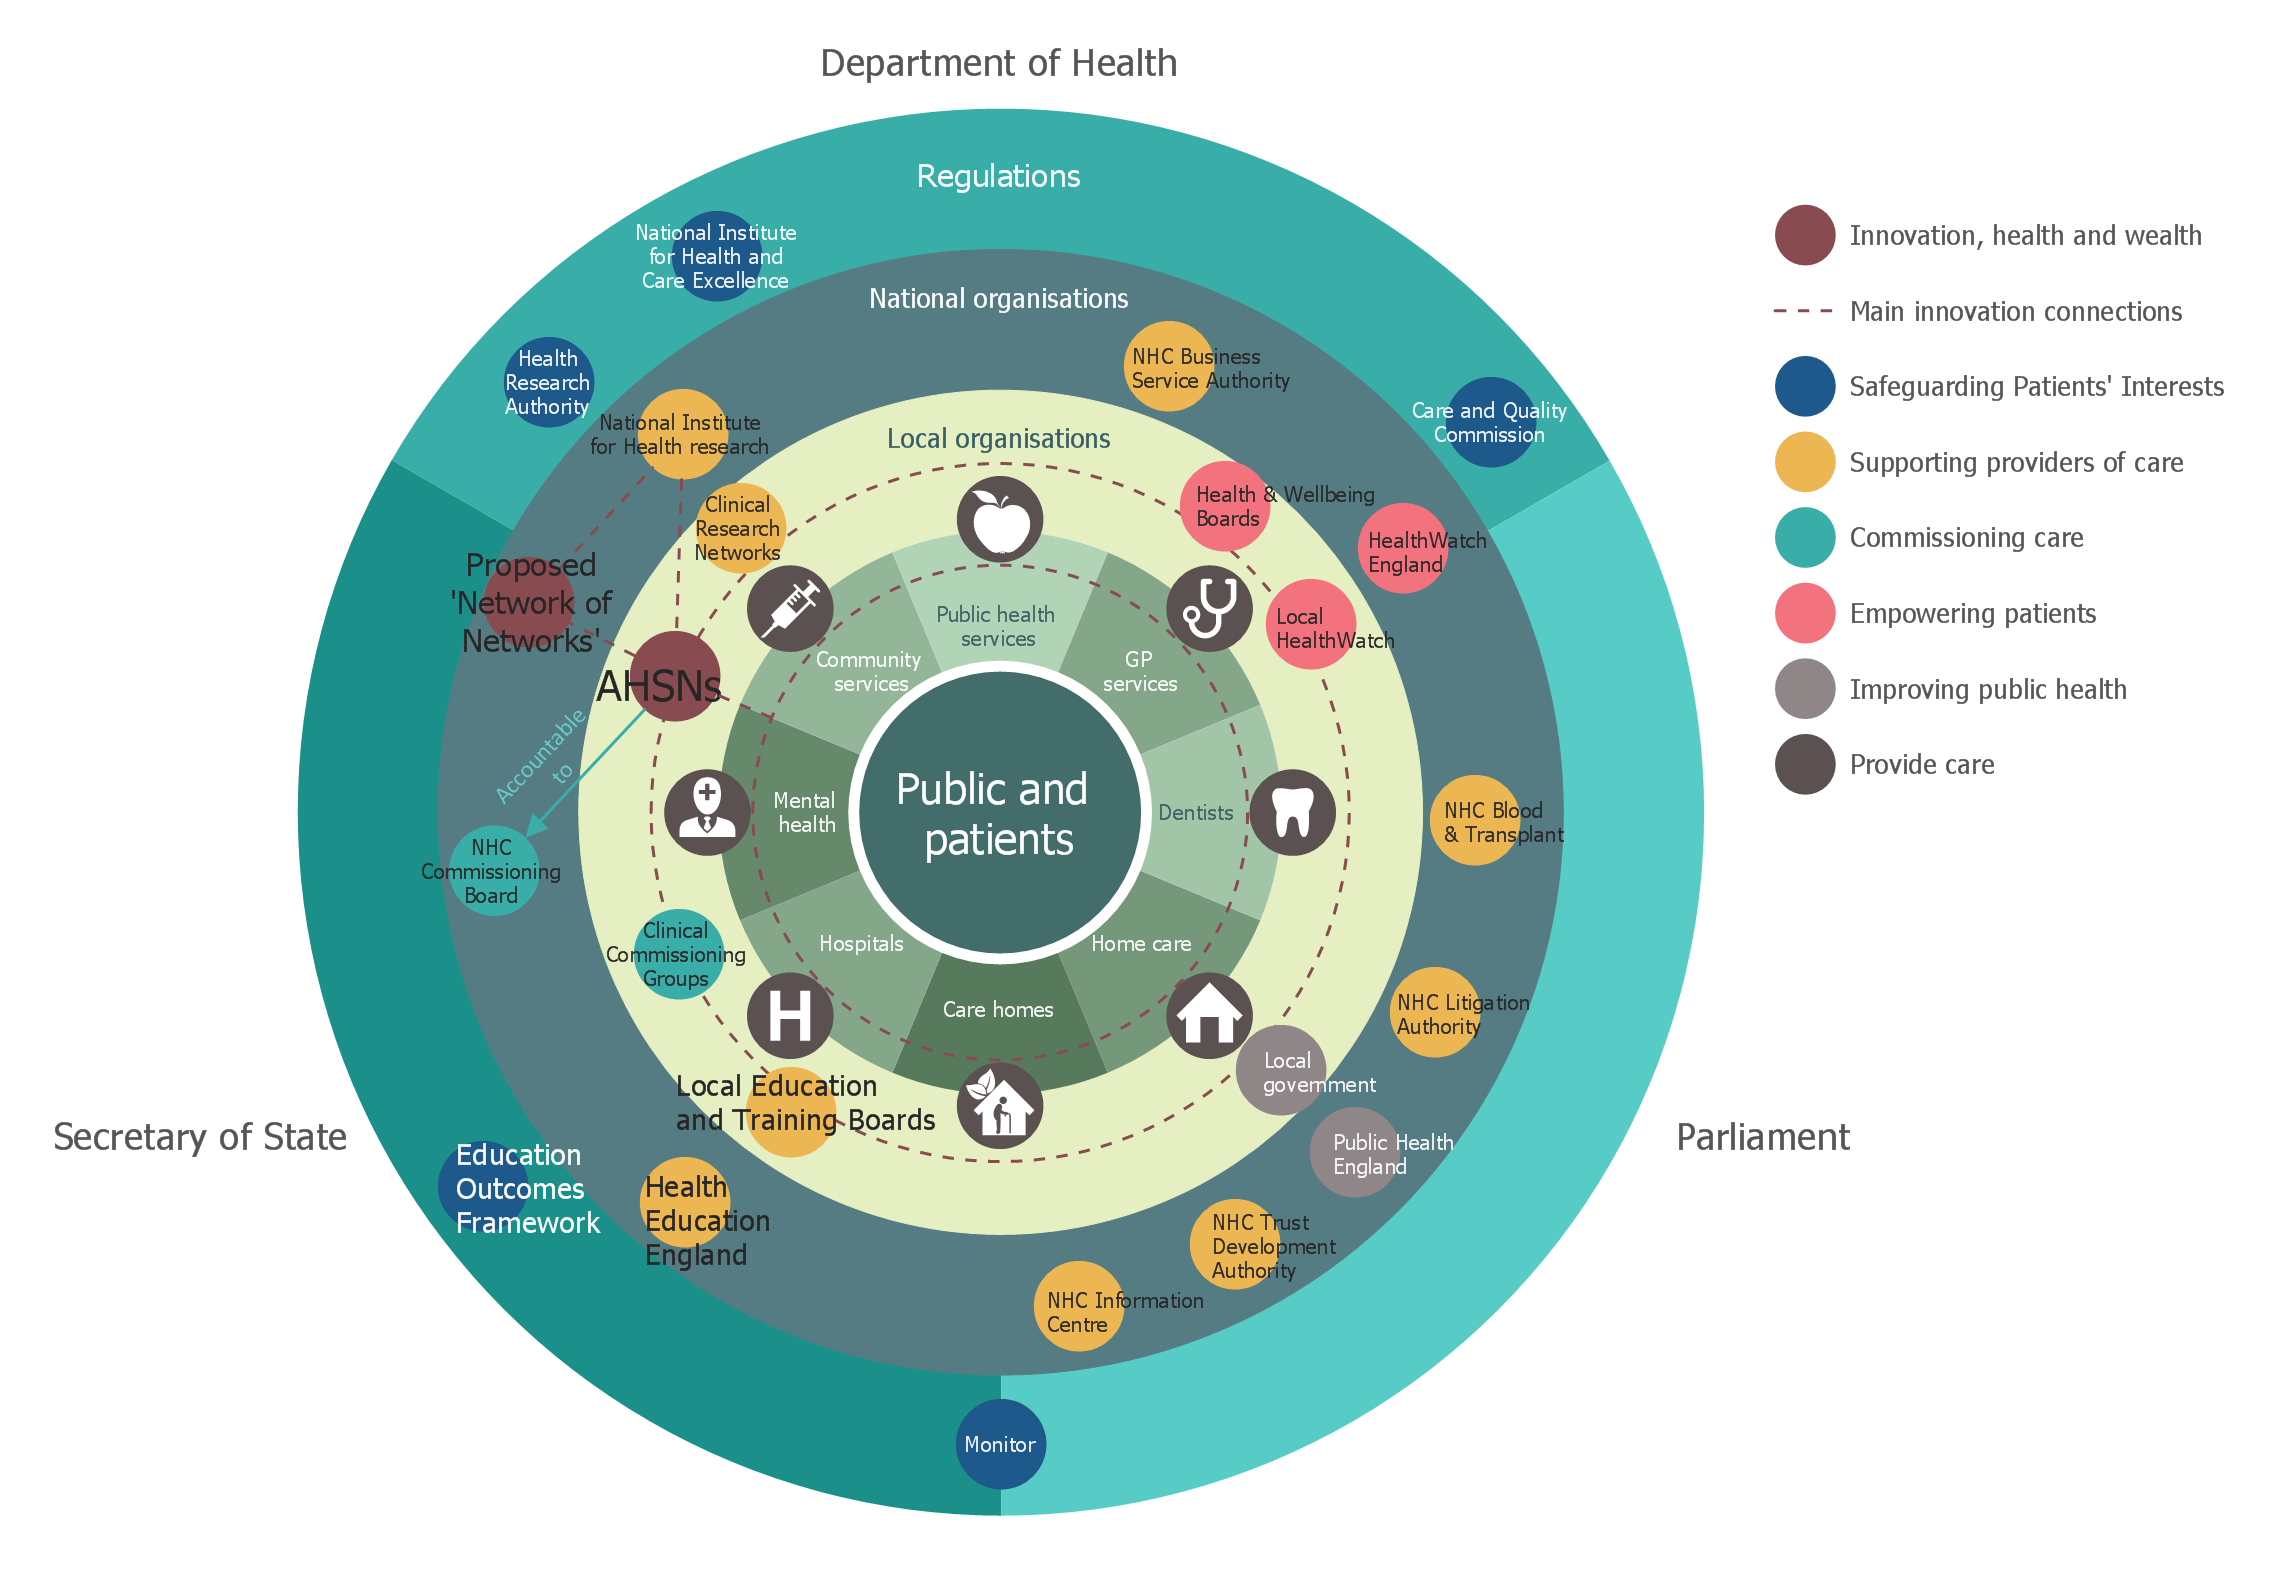 Stakeholder Onion Diagram - AHSNs Structure